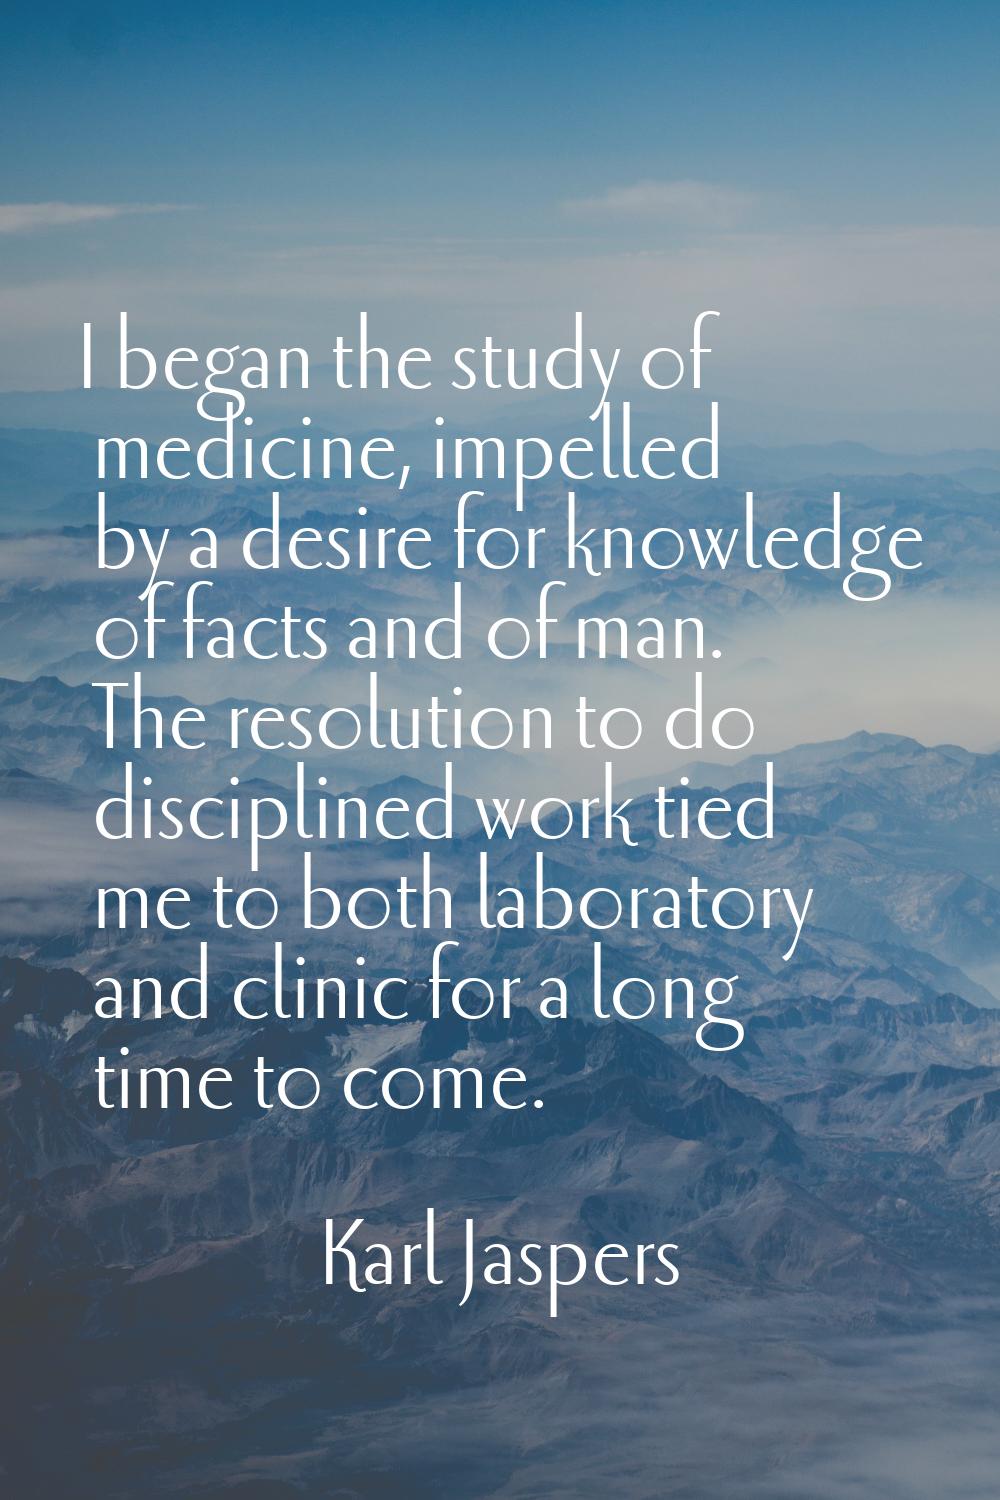 I began the study of medicine, impelled by a desire for knowledge of facts and of man. The resoluti